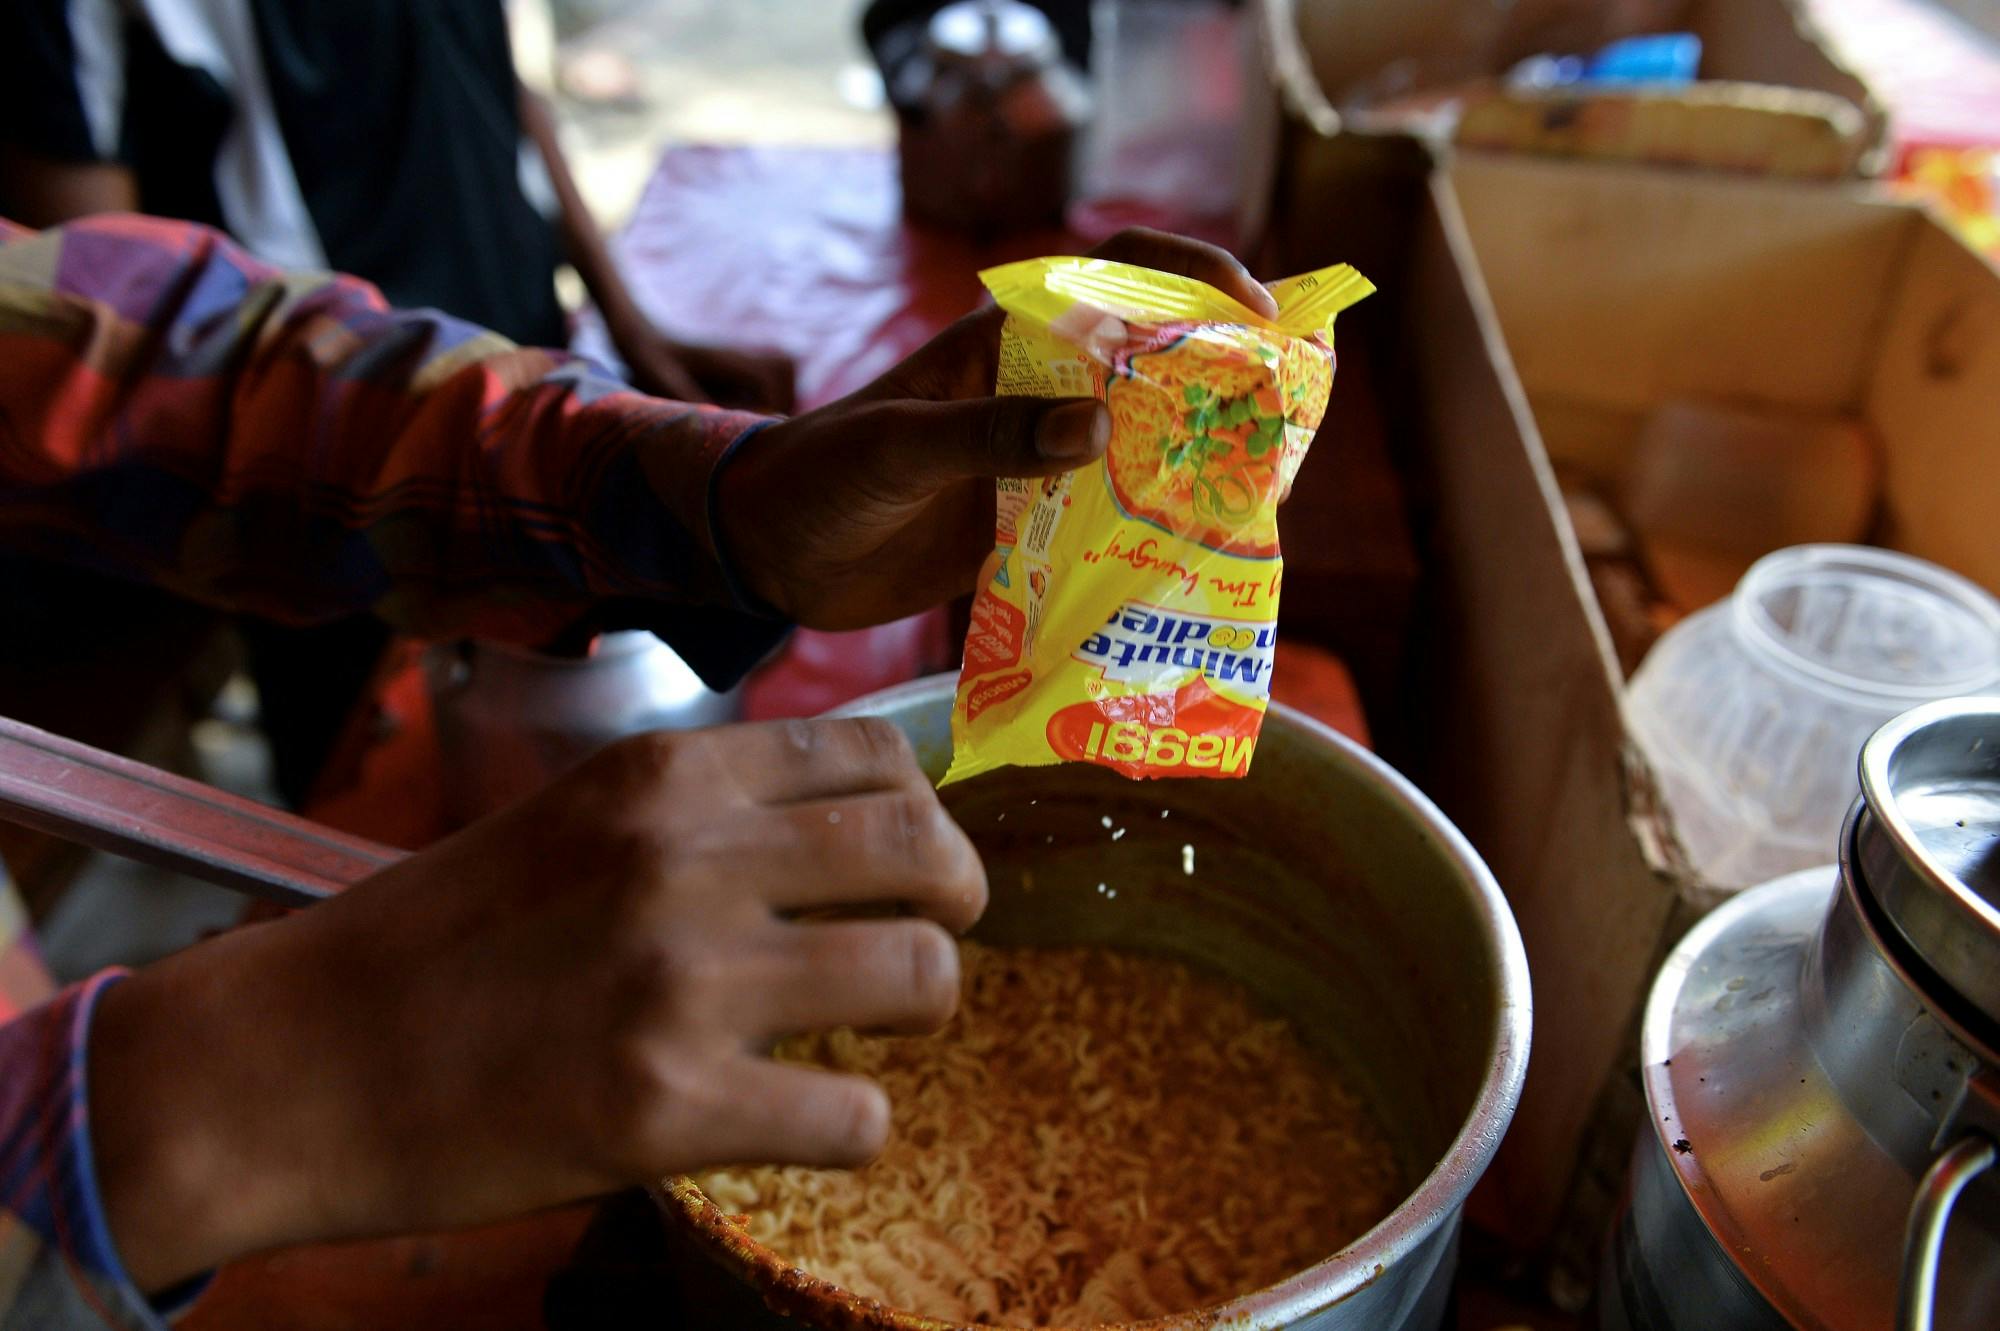 An Indian youth prepares Nestle Maggi instant noodles at his makeshift roadside food stall on the outskirts of New Delhi on June 3, 2015. (Chandan Khanna/AFP via Getty Images)